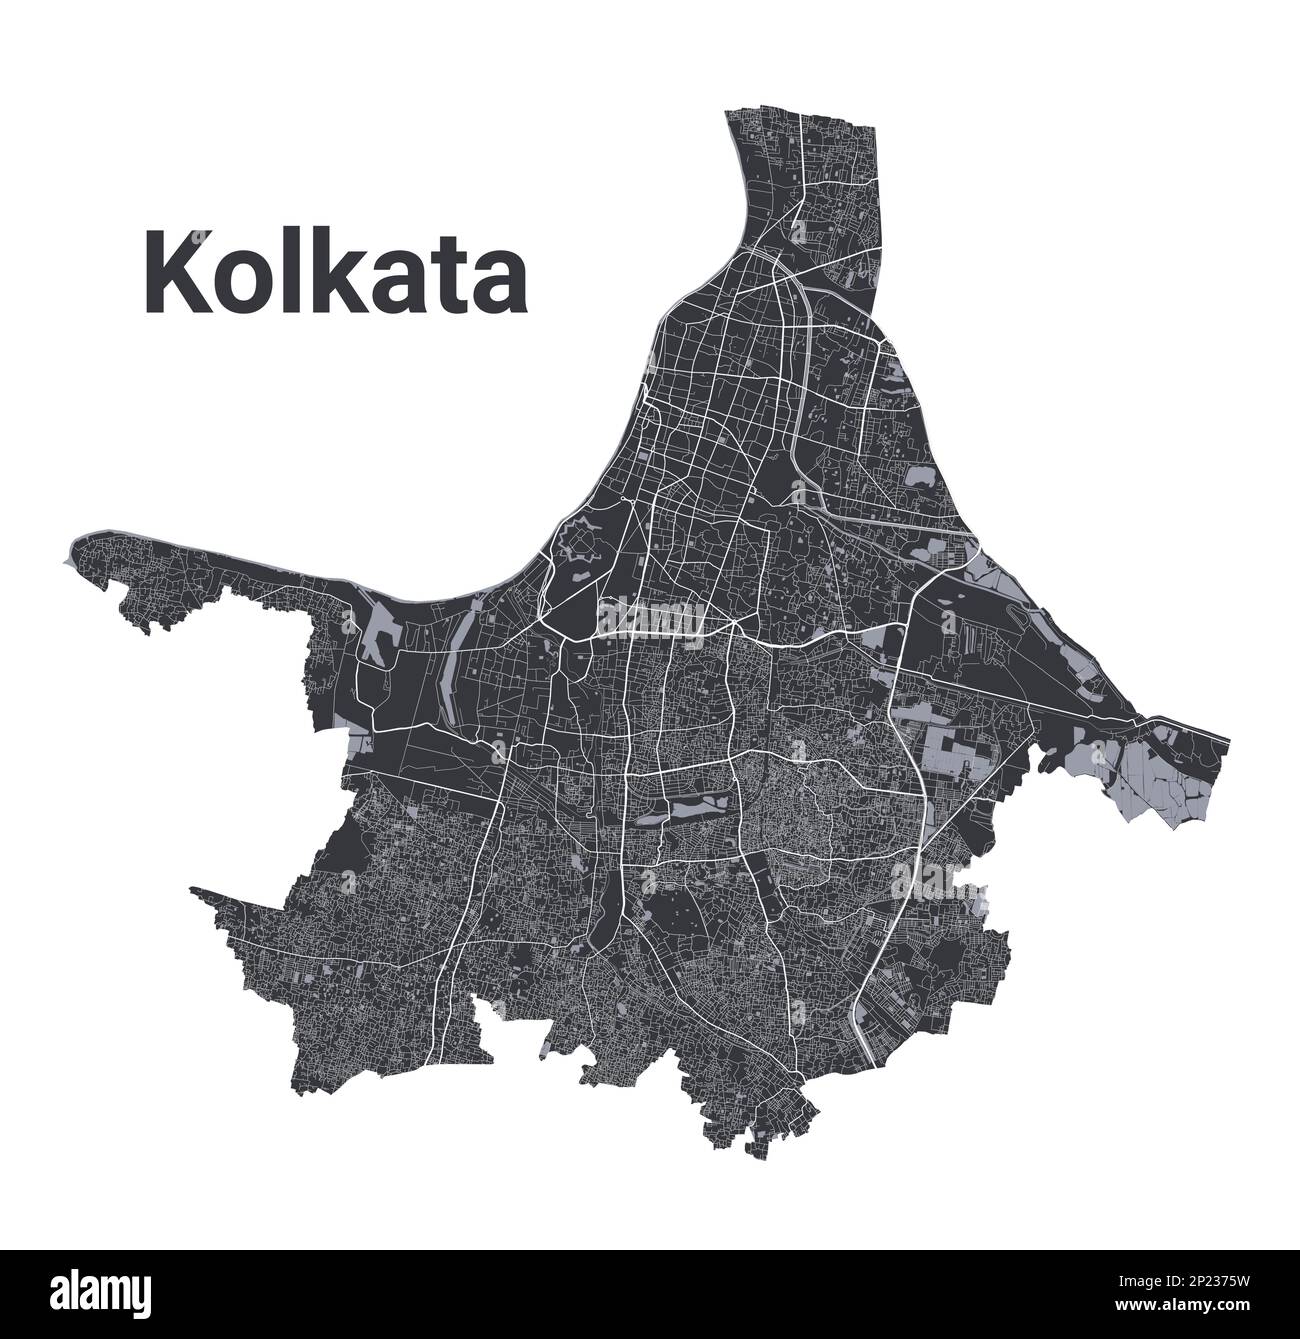 Kolkata map. Detailed vector map of Kolkata city administrative area. Cityscape poster metropolitan aria view. Black land with white roads and avenues Stock Vector